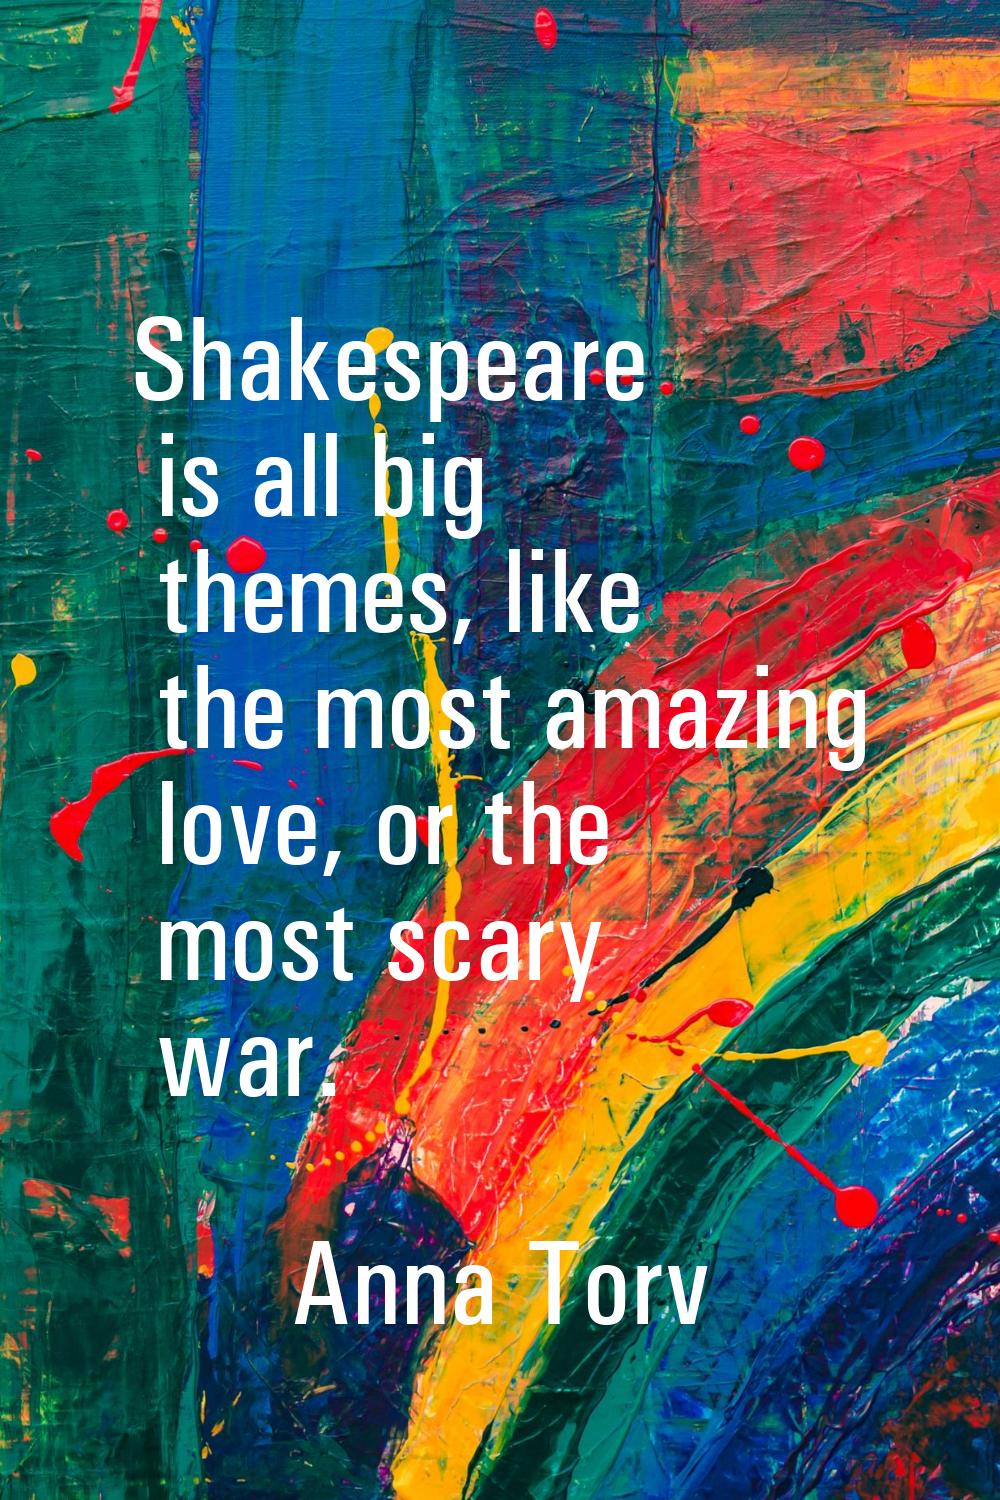 Shakespeare is all big themes, like the most amazing love, or the most scary war.